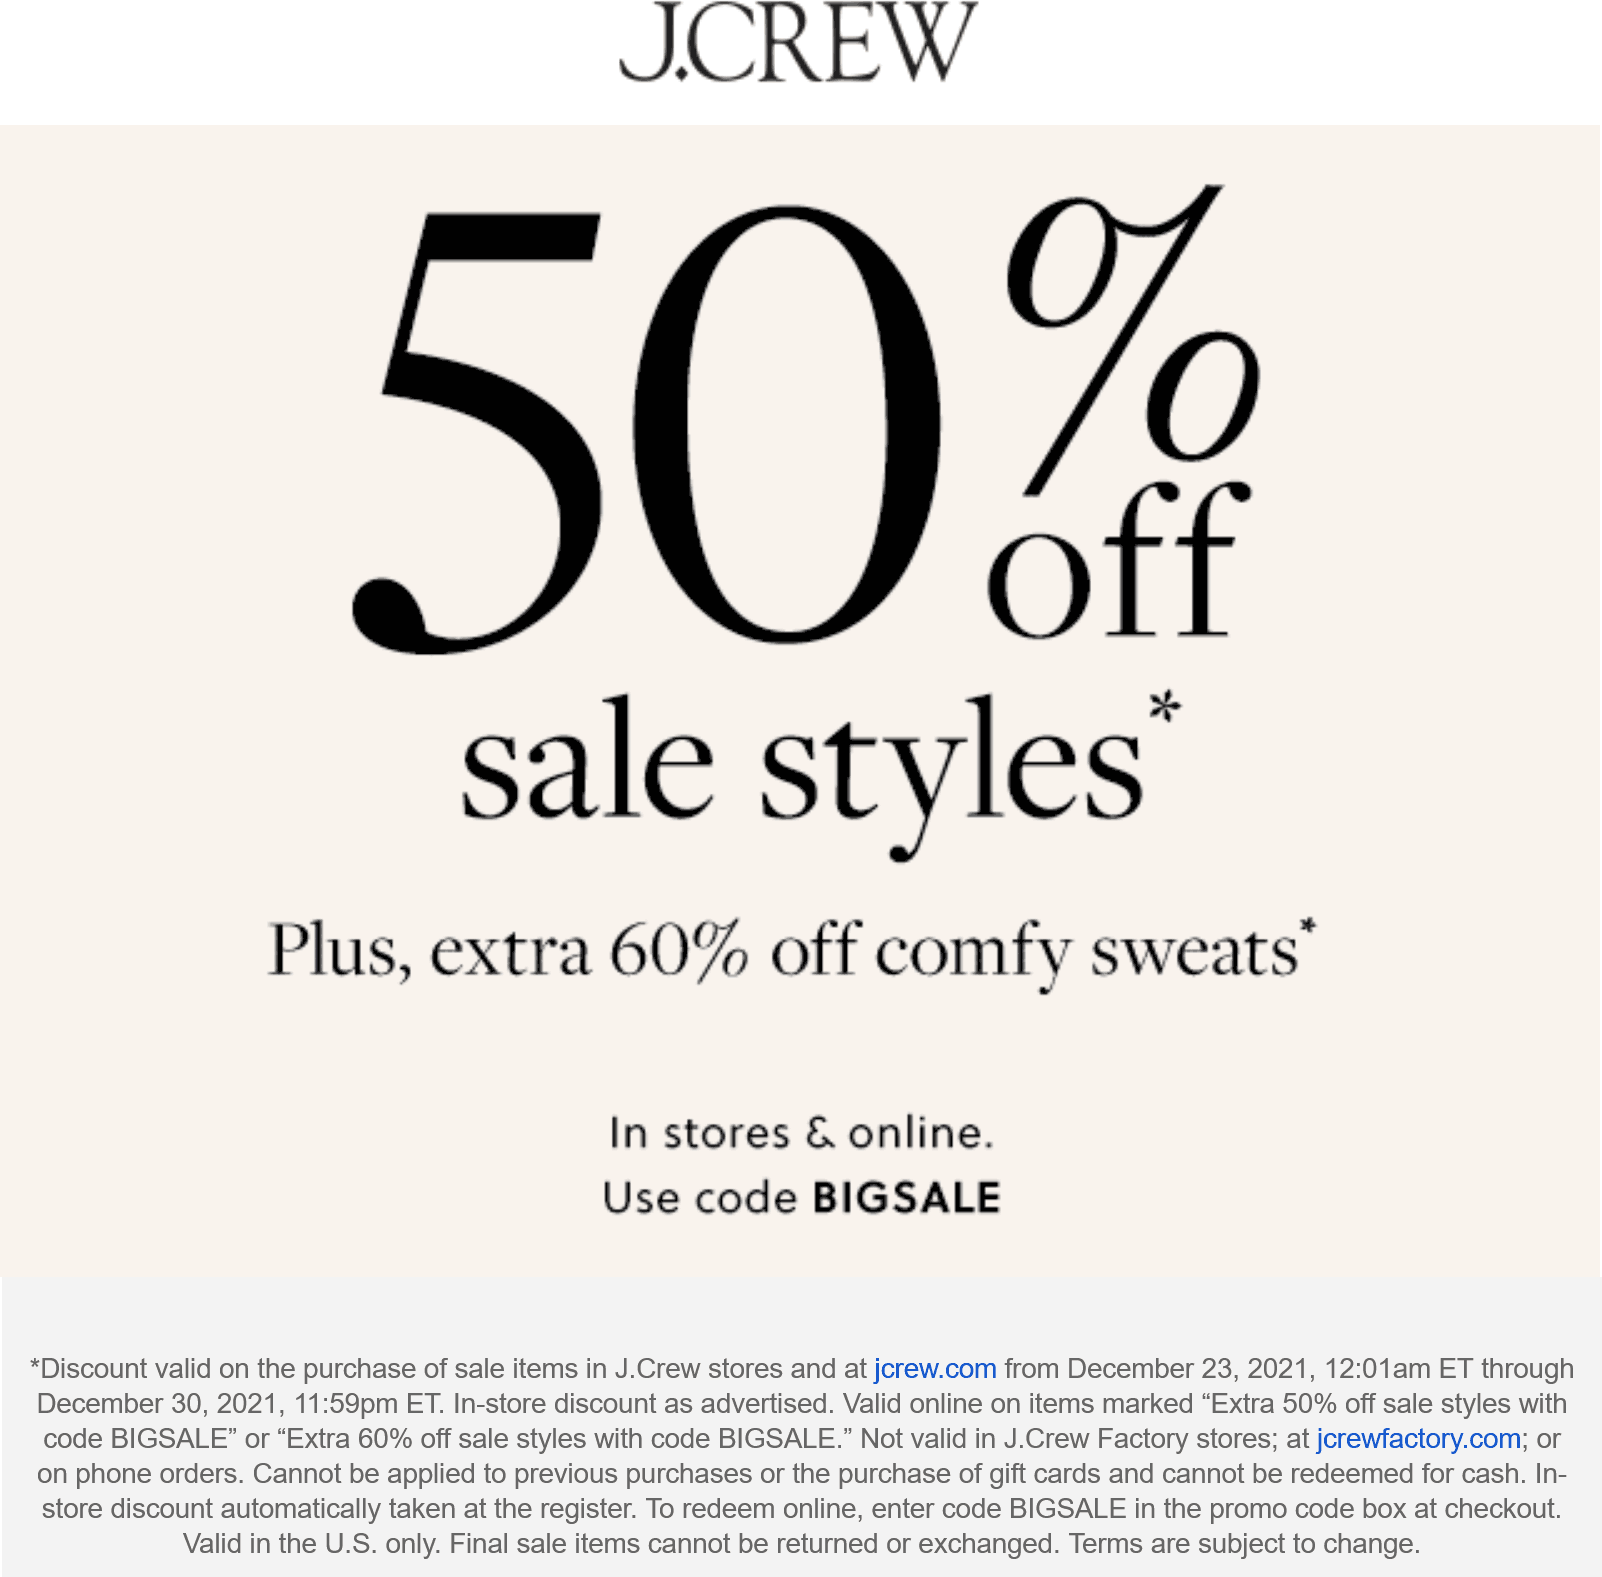 J.Crew stores Coupon  Extra 50% off sale styles at J.Crew, or online via promo code BIGSALE #jcrew 